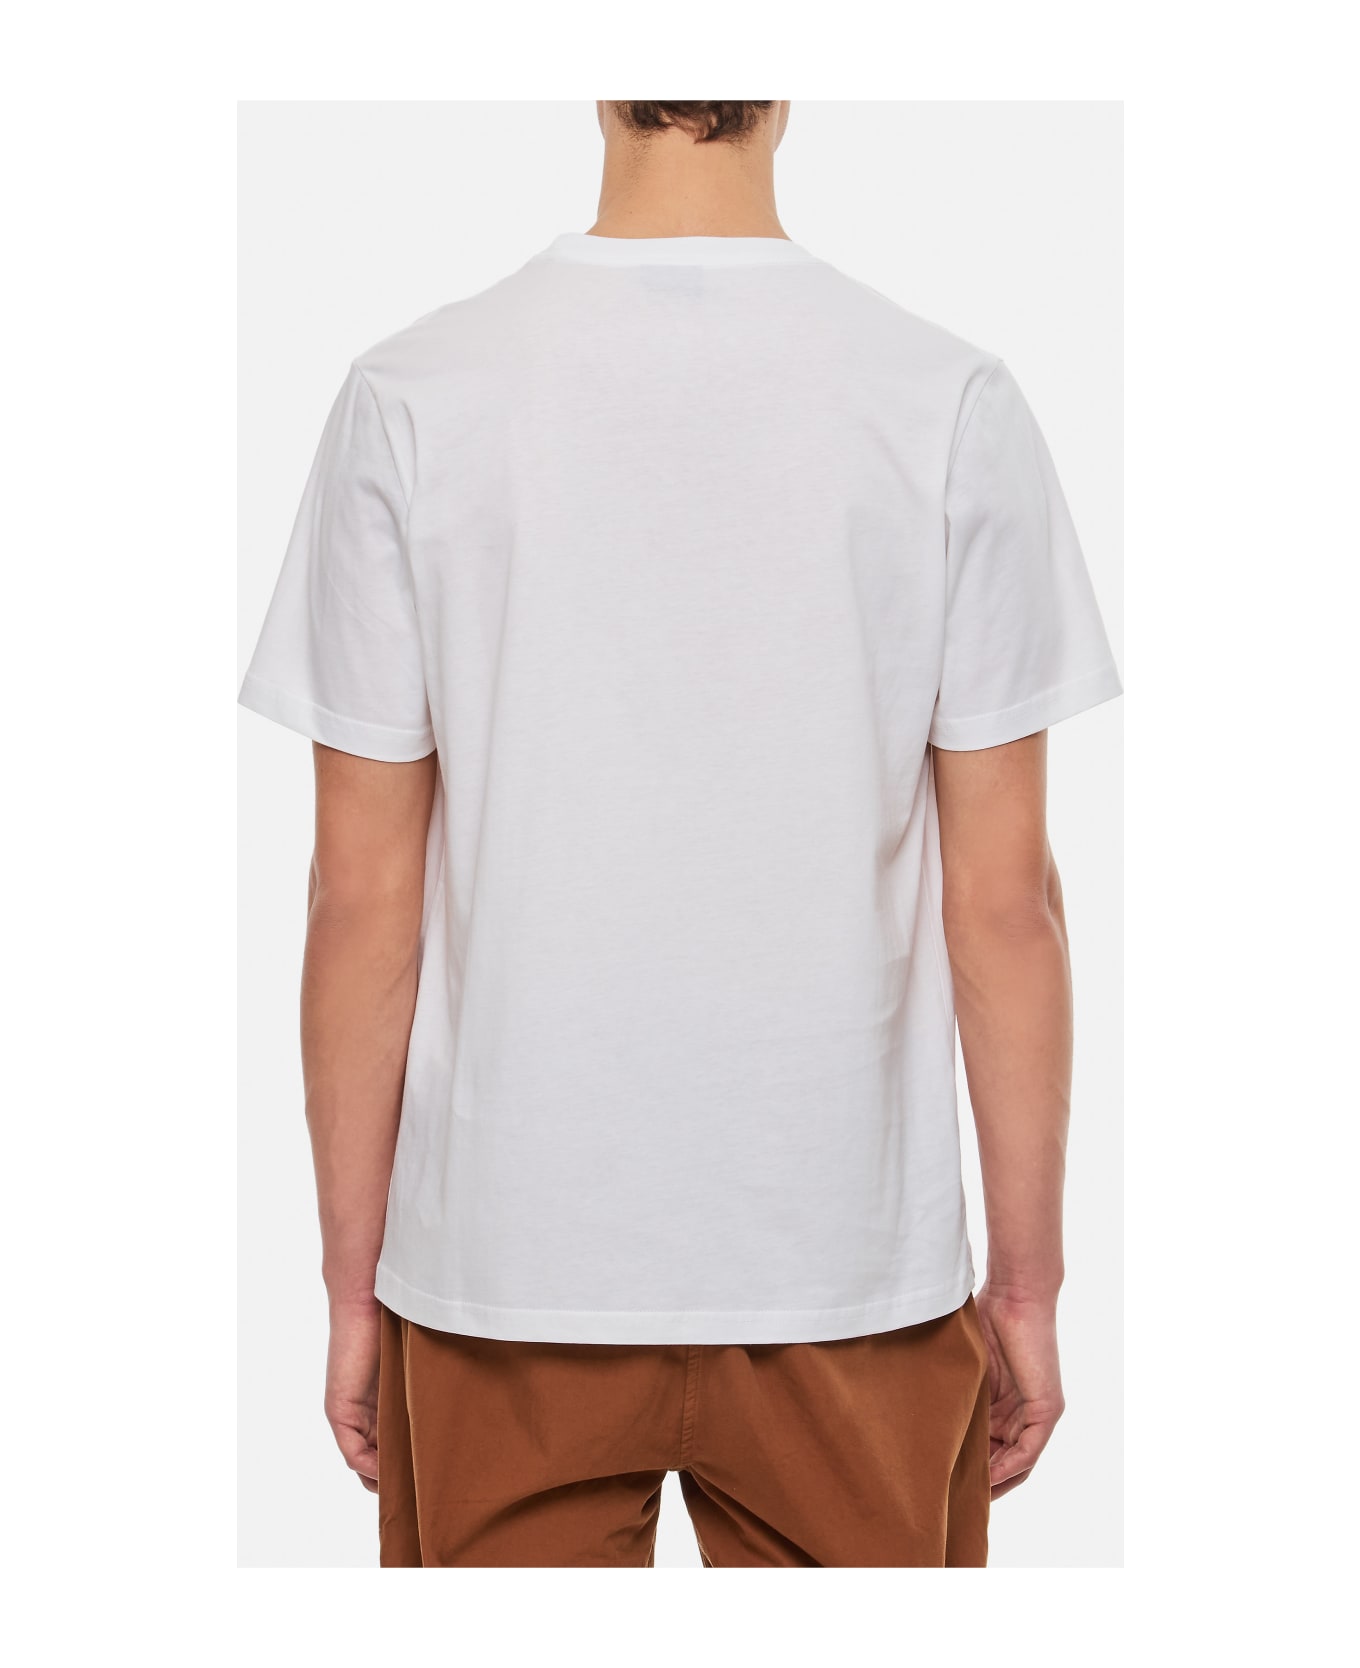 PS by Paul Smith Rabbit Poster T-shirt - White シャツ